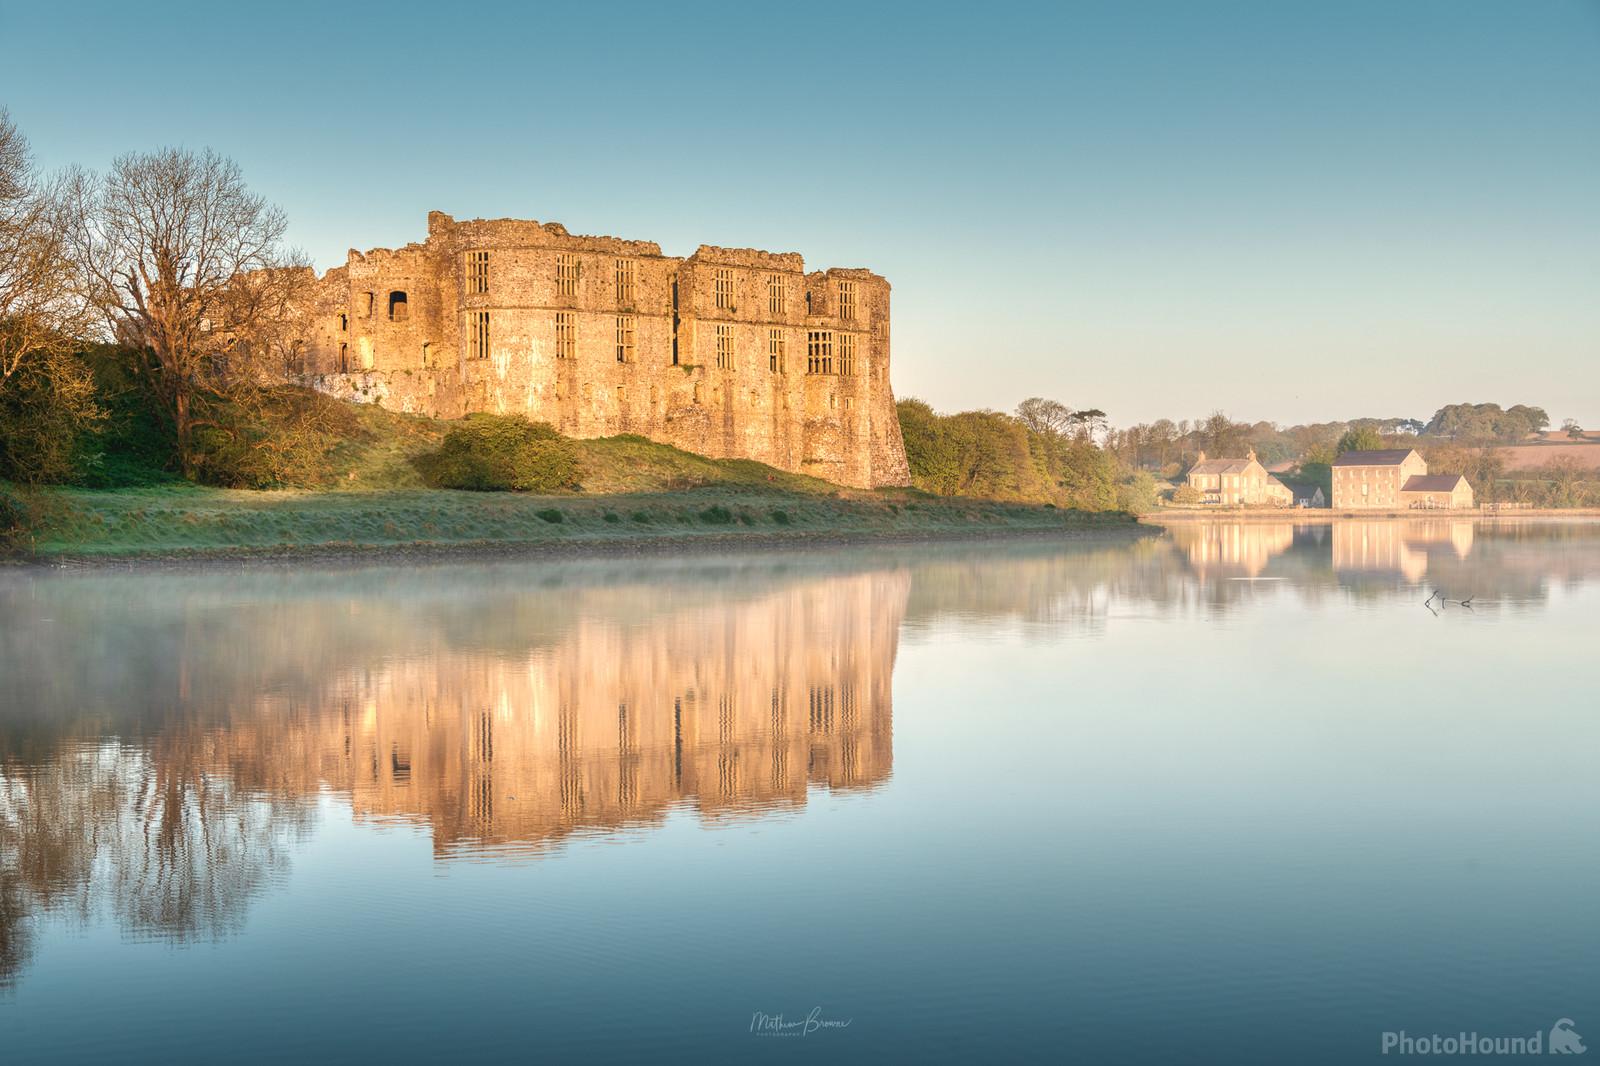 Image of Carew Castle & River by Mathew Browne